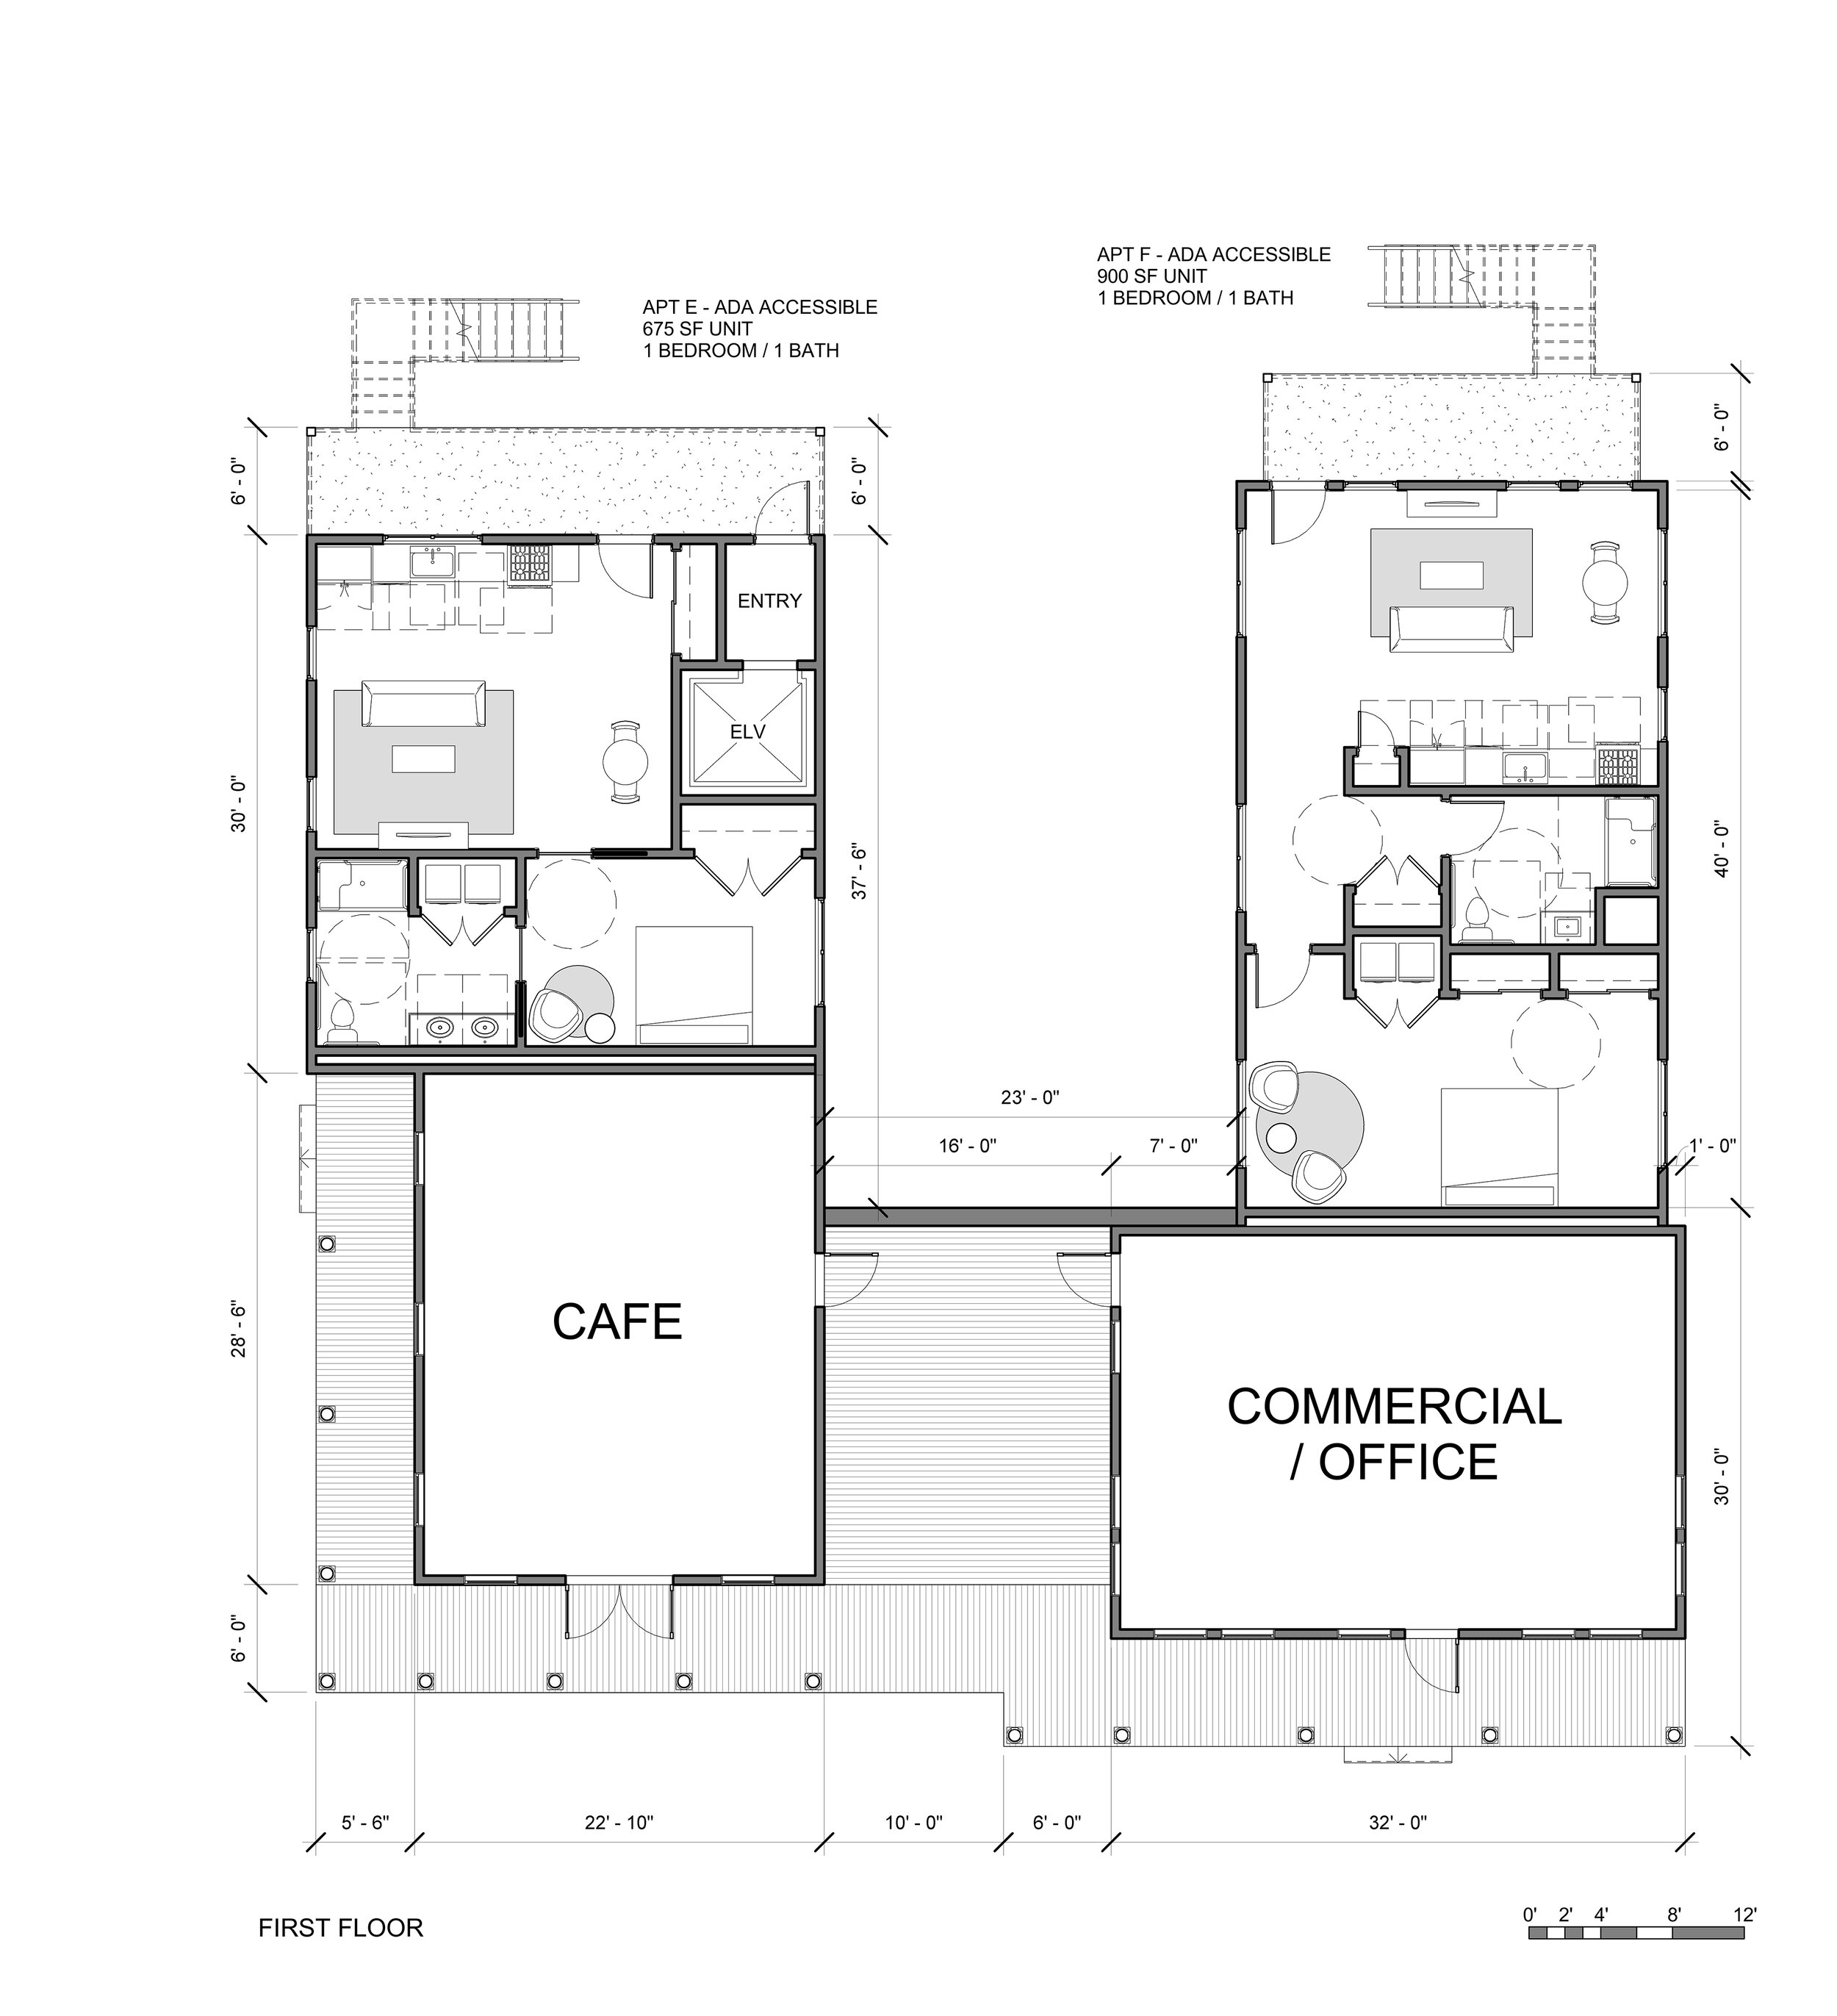 2021-05-17 BRILC Concept Plans - Floor Plan - CAMPBELL AVE MIXED USE UNITS - ALLEY LEVEL ed.jpg